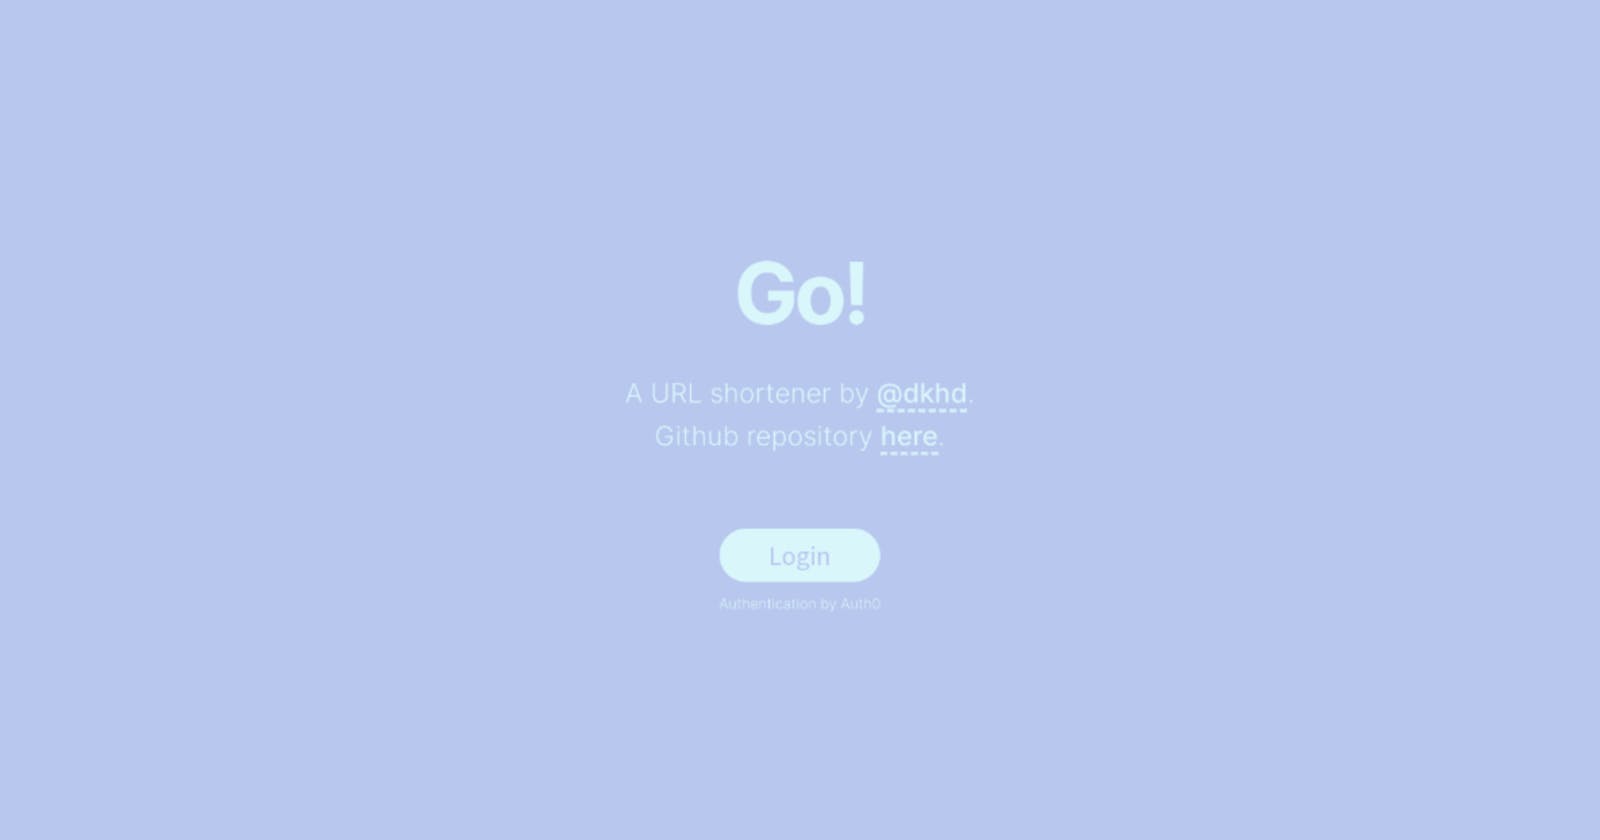 Go! — My Own URL Shortener That You Can Also Use and Contribute